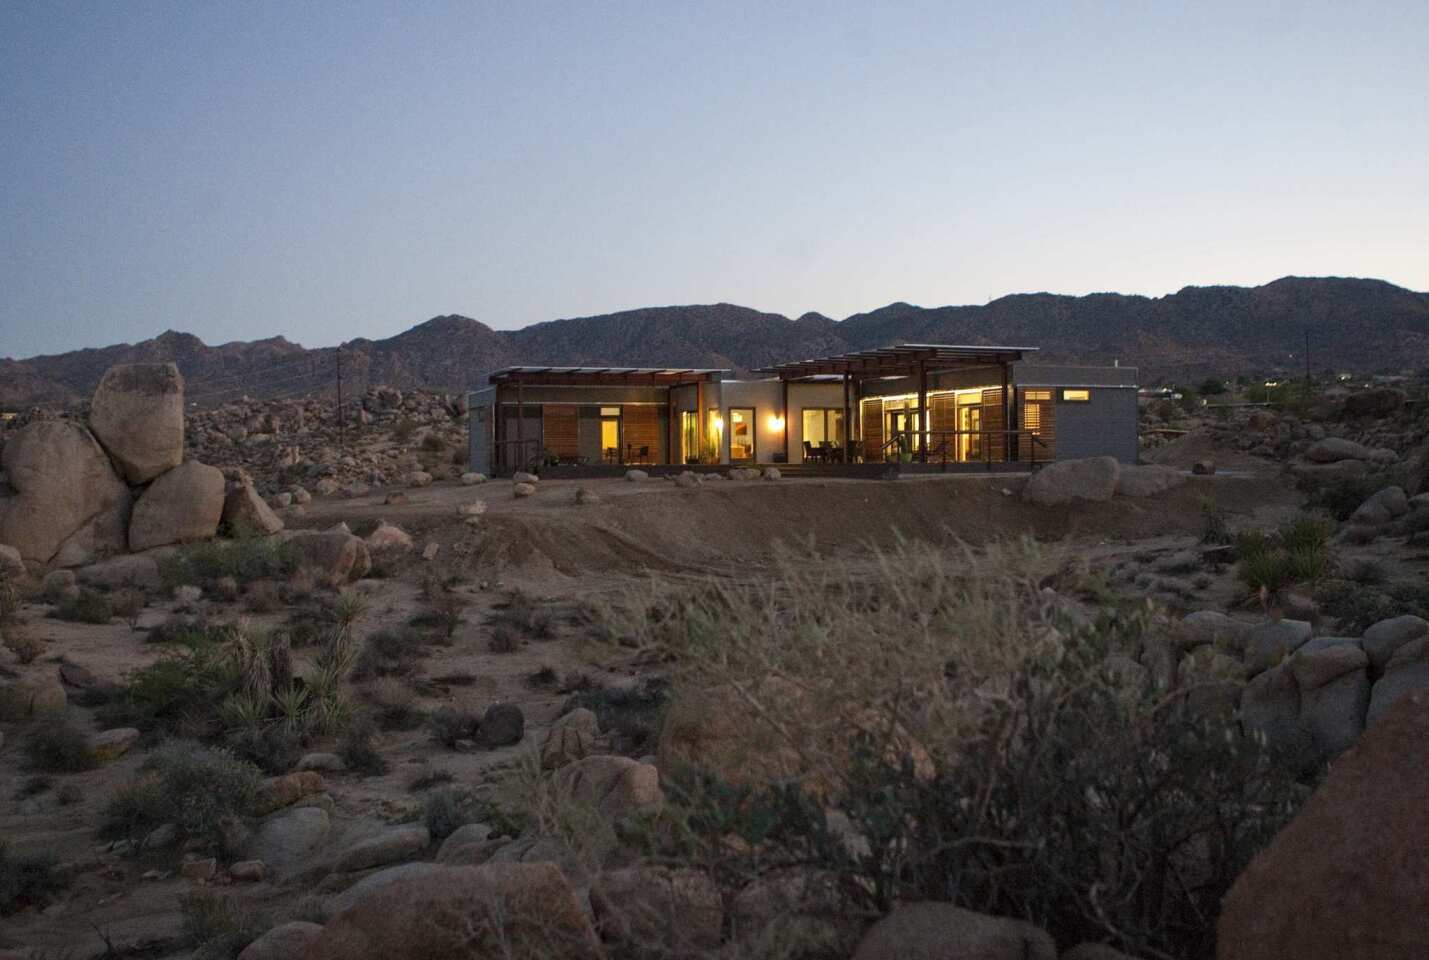 The low-slung prefab house built for Tim Disney by Blu Homes sits in the otherworldly landscape of Joshua Tree. The indoor-outdoor design, pictured here from the rear, includes generous shaded decks and a detached guest house, out of view here. Its prefab modules were built in less than eight weeks in a factory, then transported by truck and craned into place.